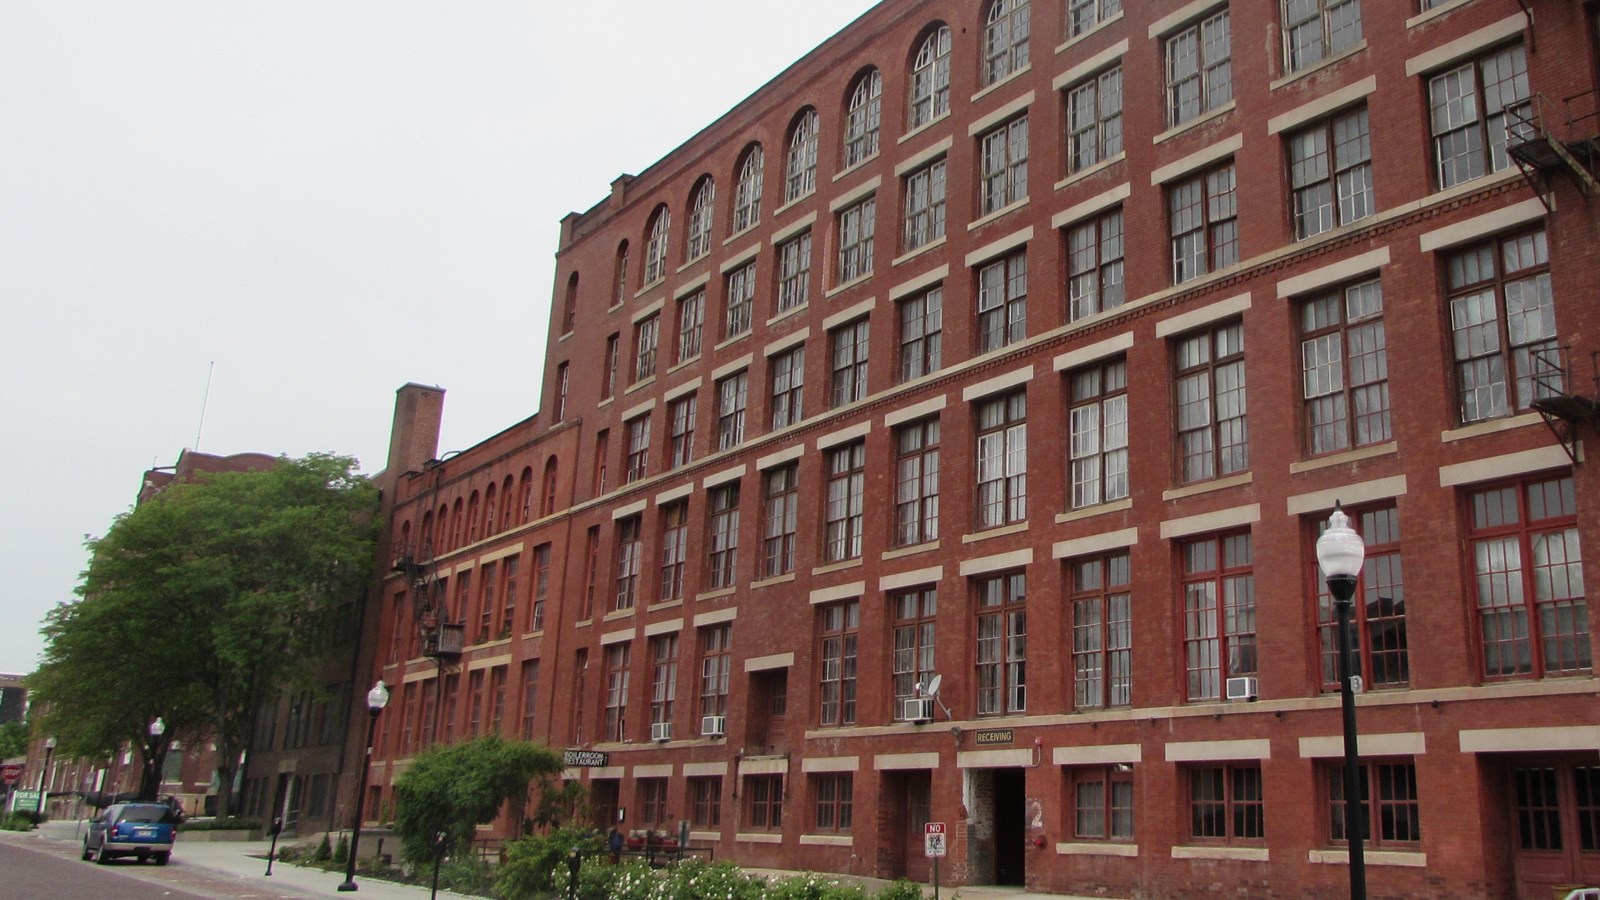 Large brick warehouse and office buildings fronted by brick streets